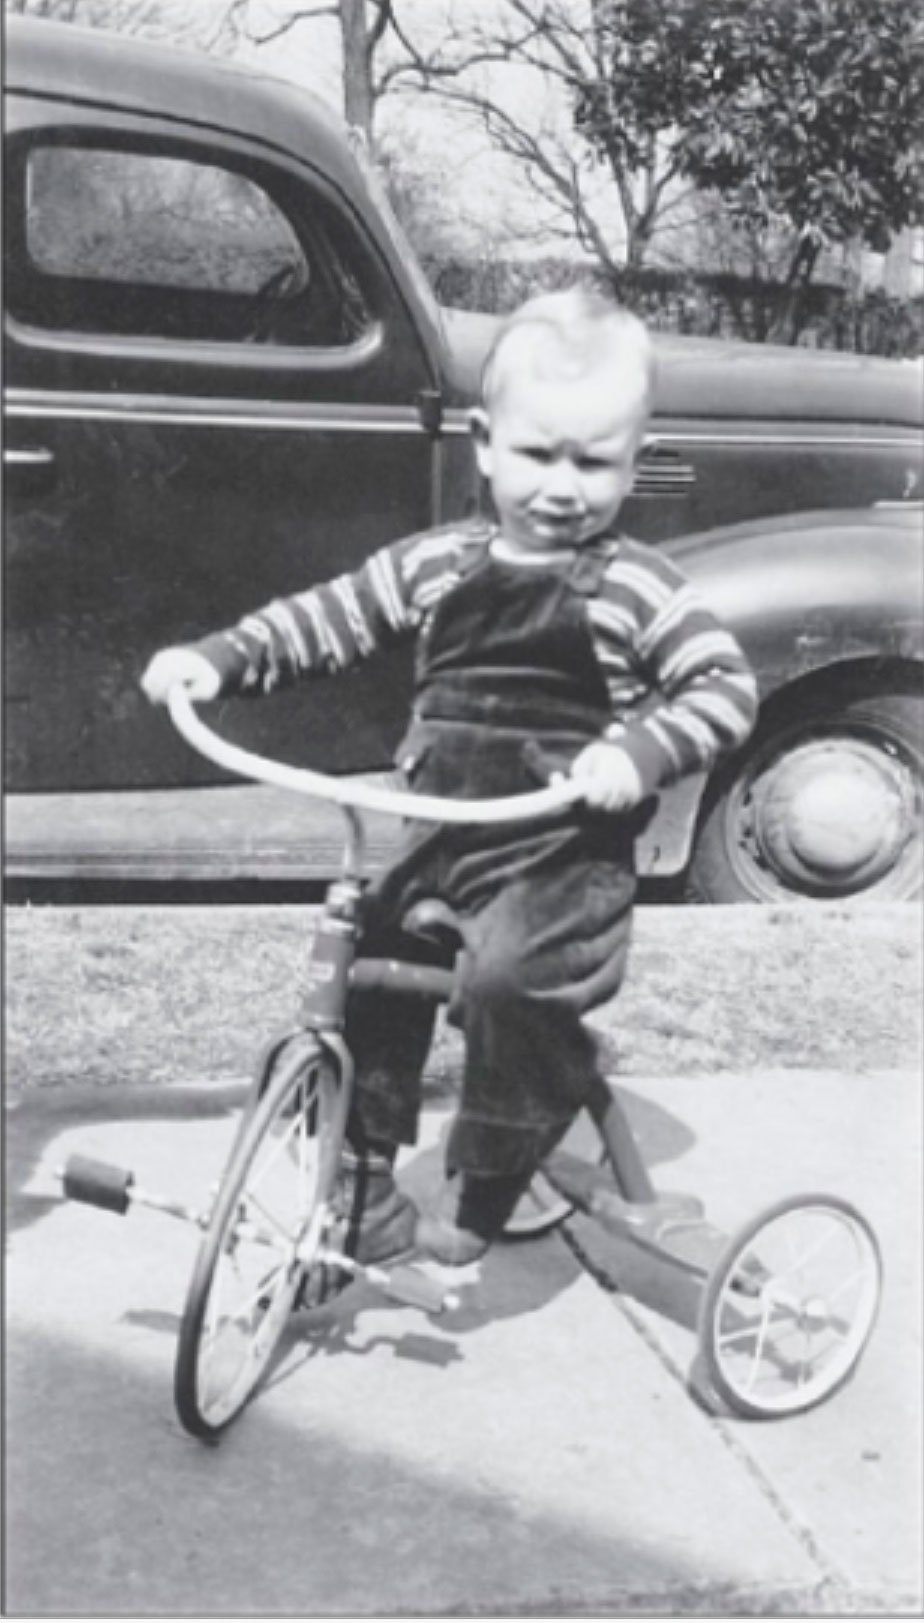 LIFE---Truman-Parrott-riding-a-tricycle-at-his-childhood-home-in-downtown-Homewood----courtesy-of-Howard-Onorato.jpg